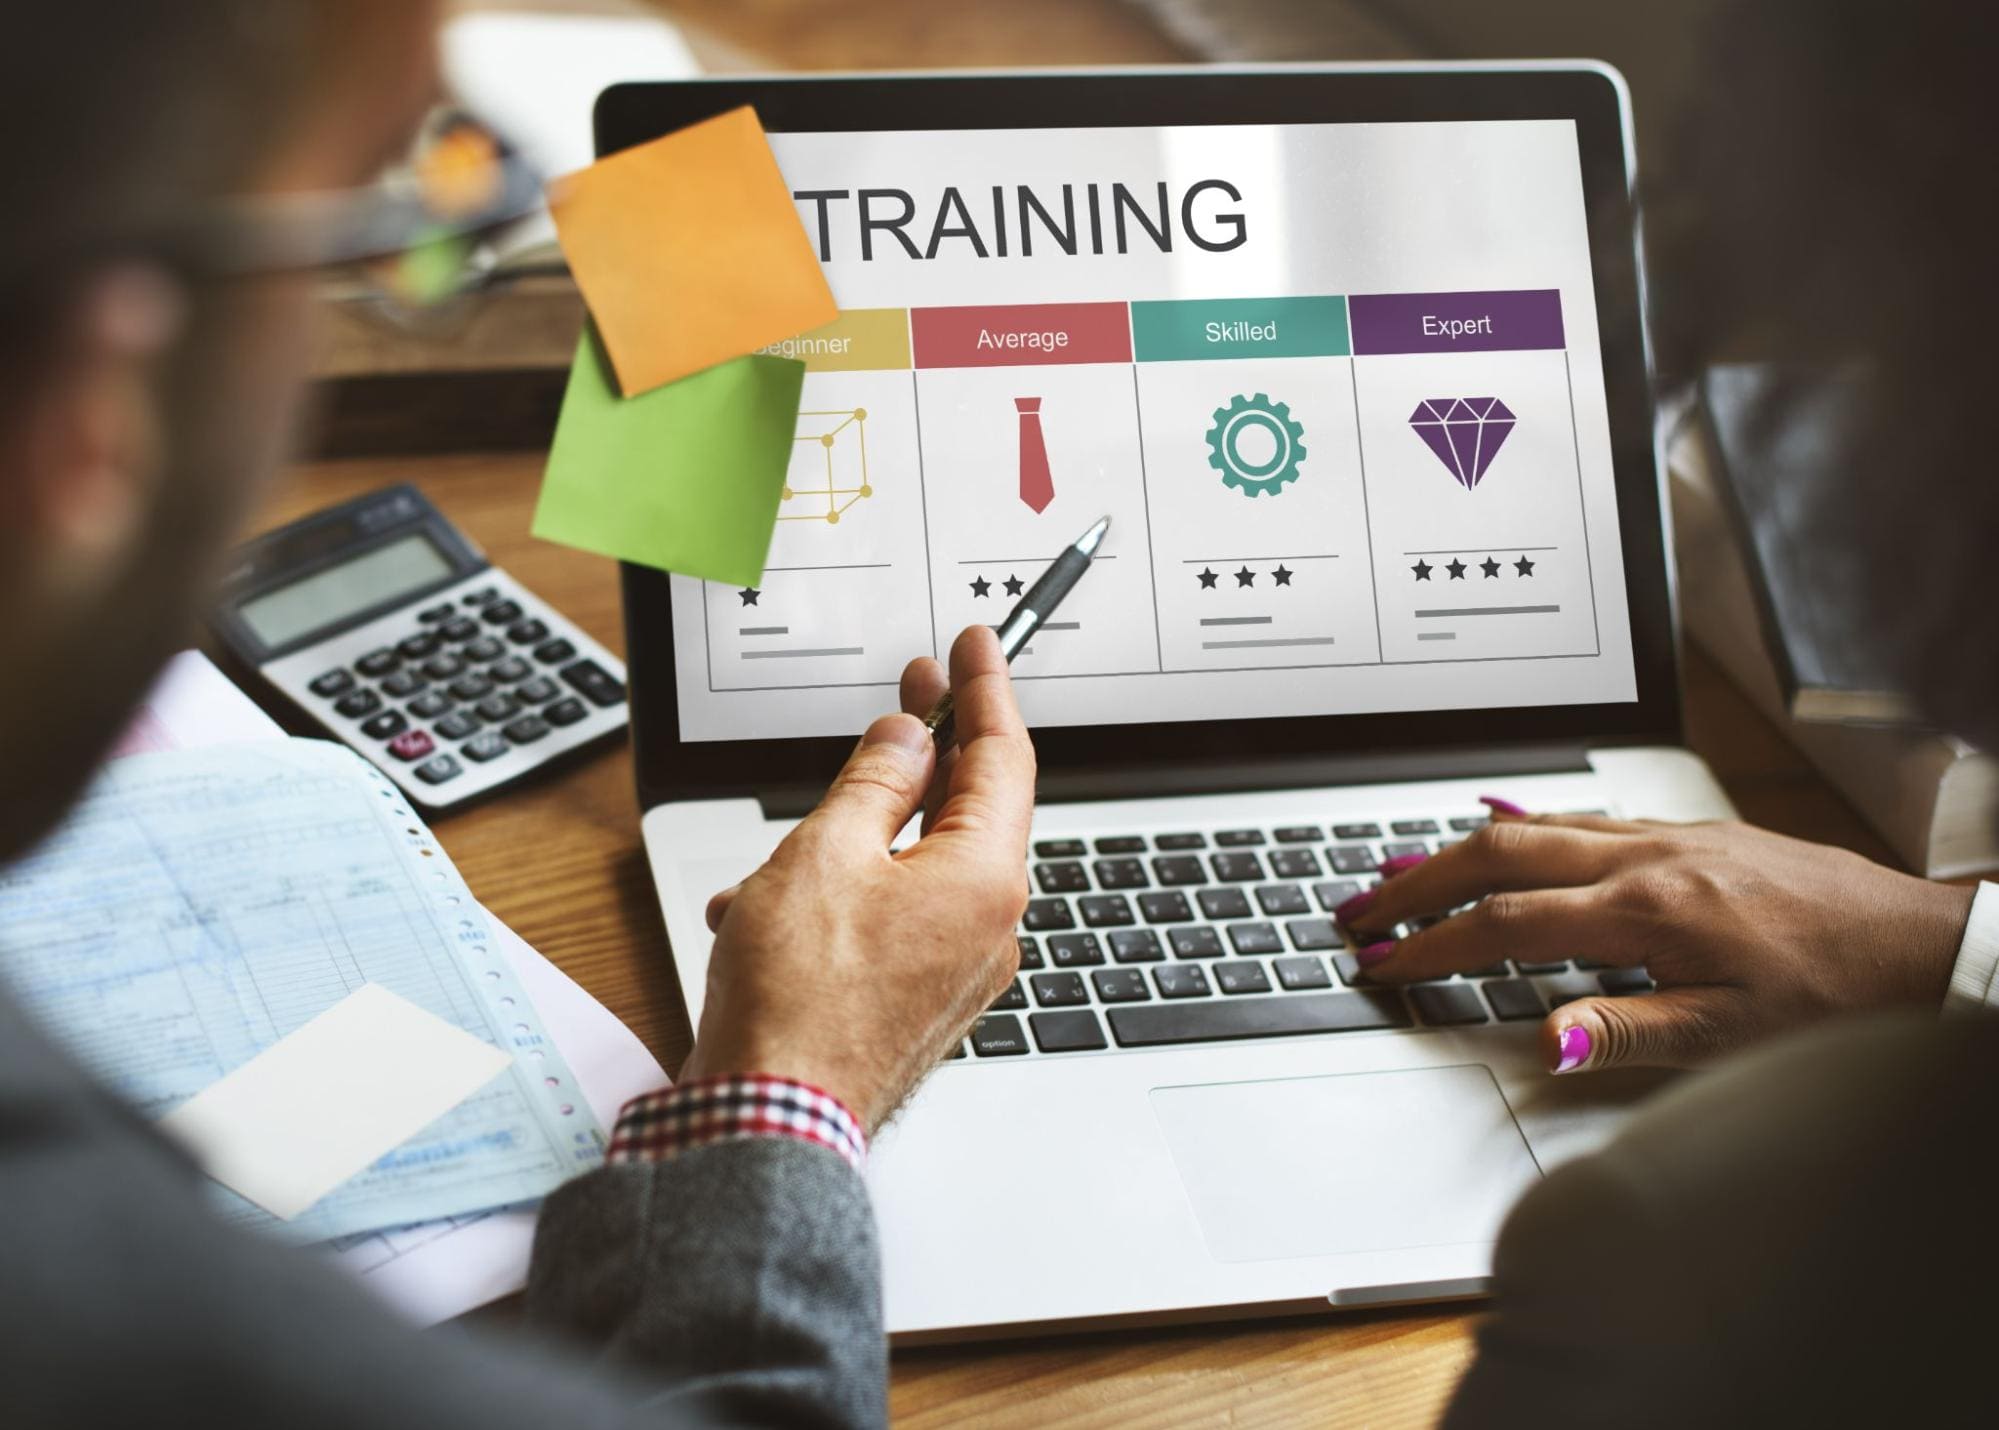 What is training? Crucial role of training and how to build an effective training program